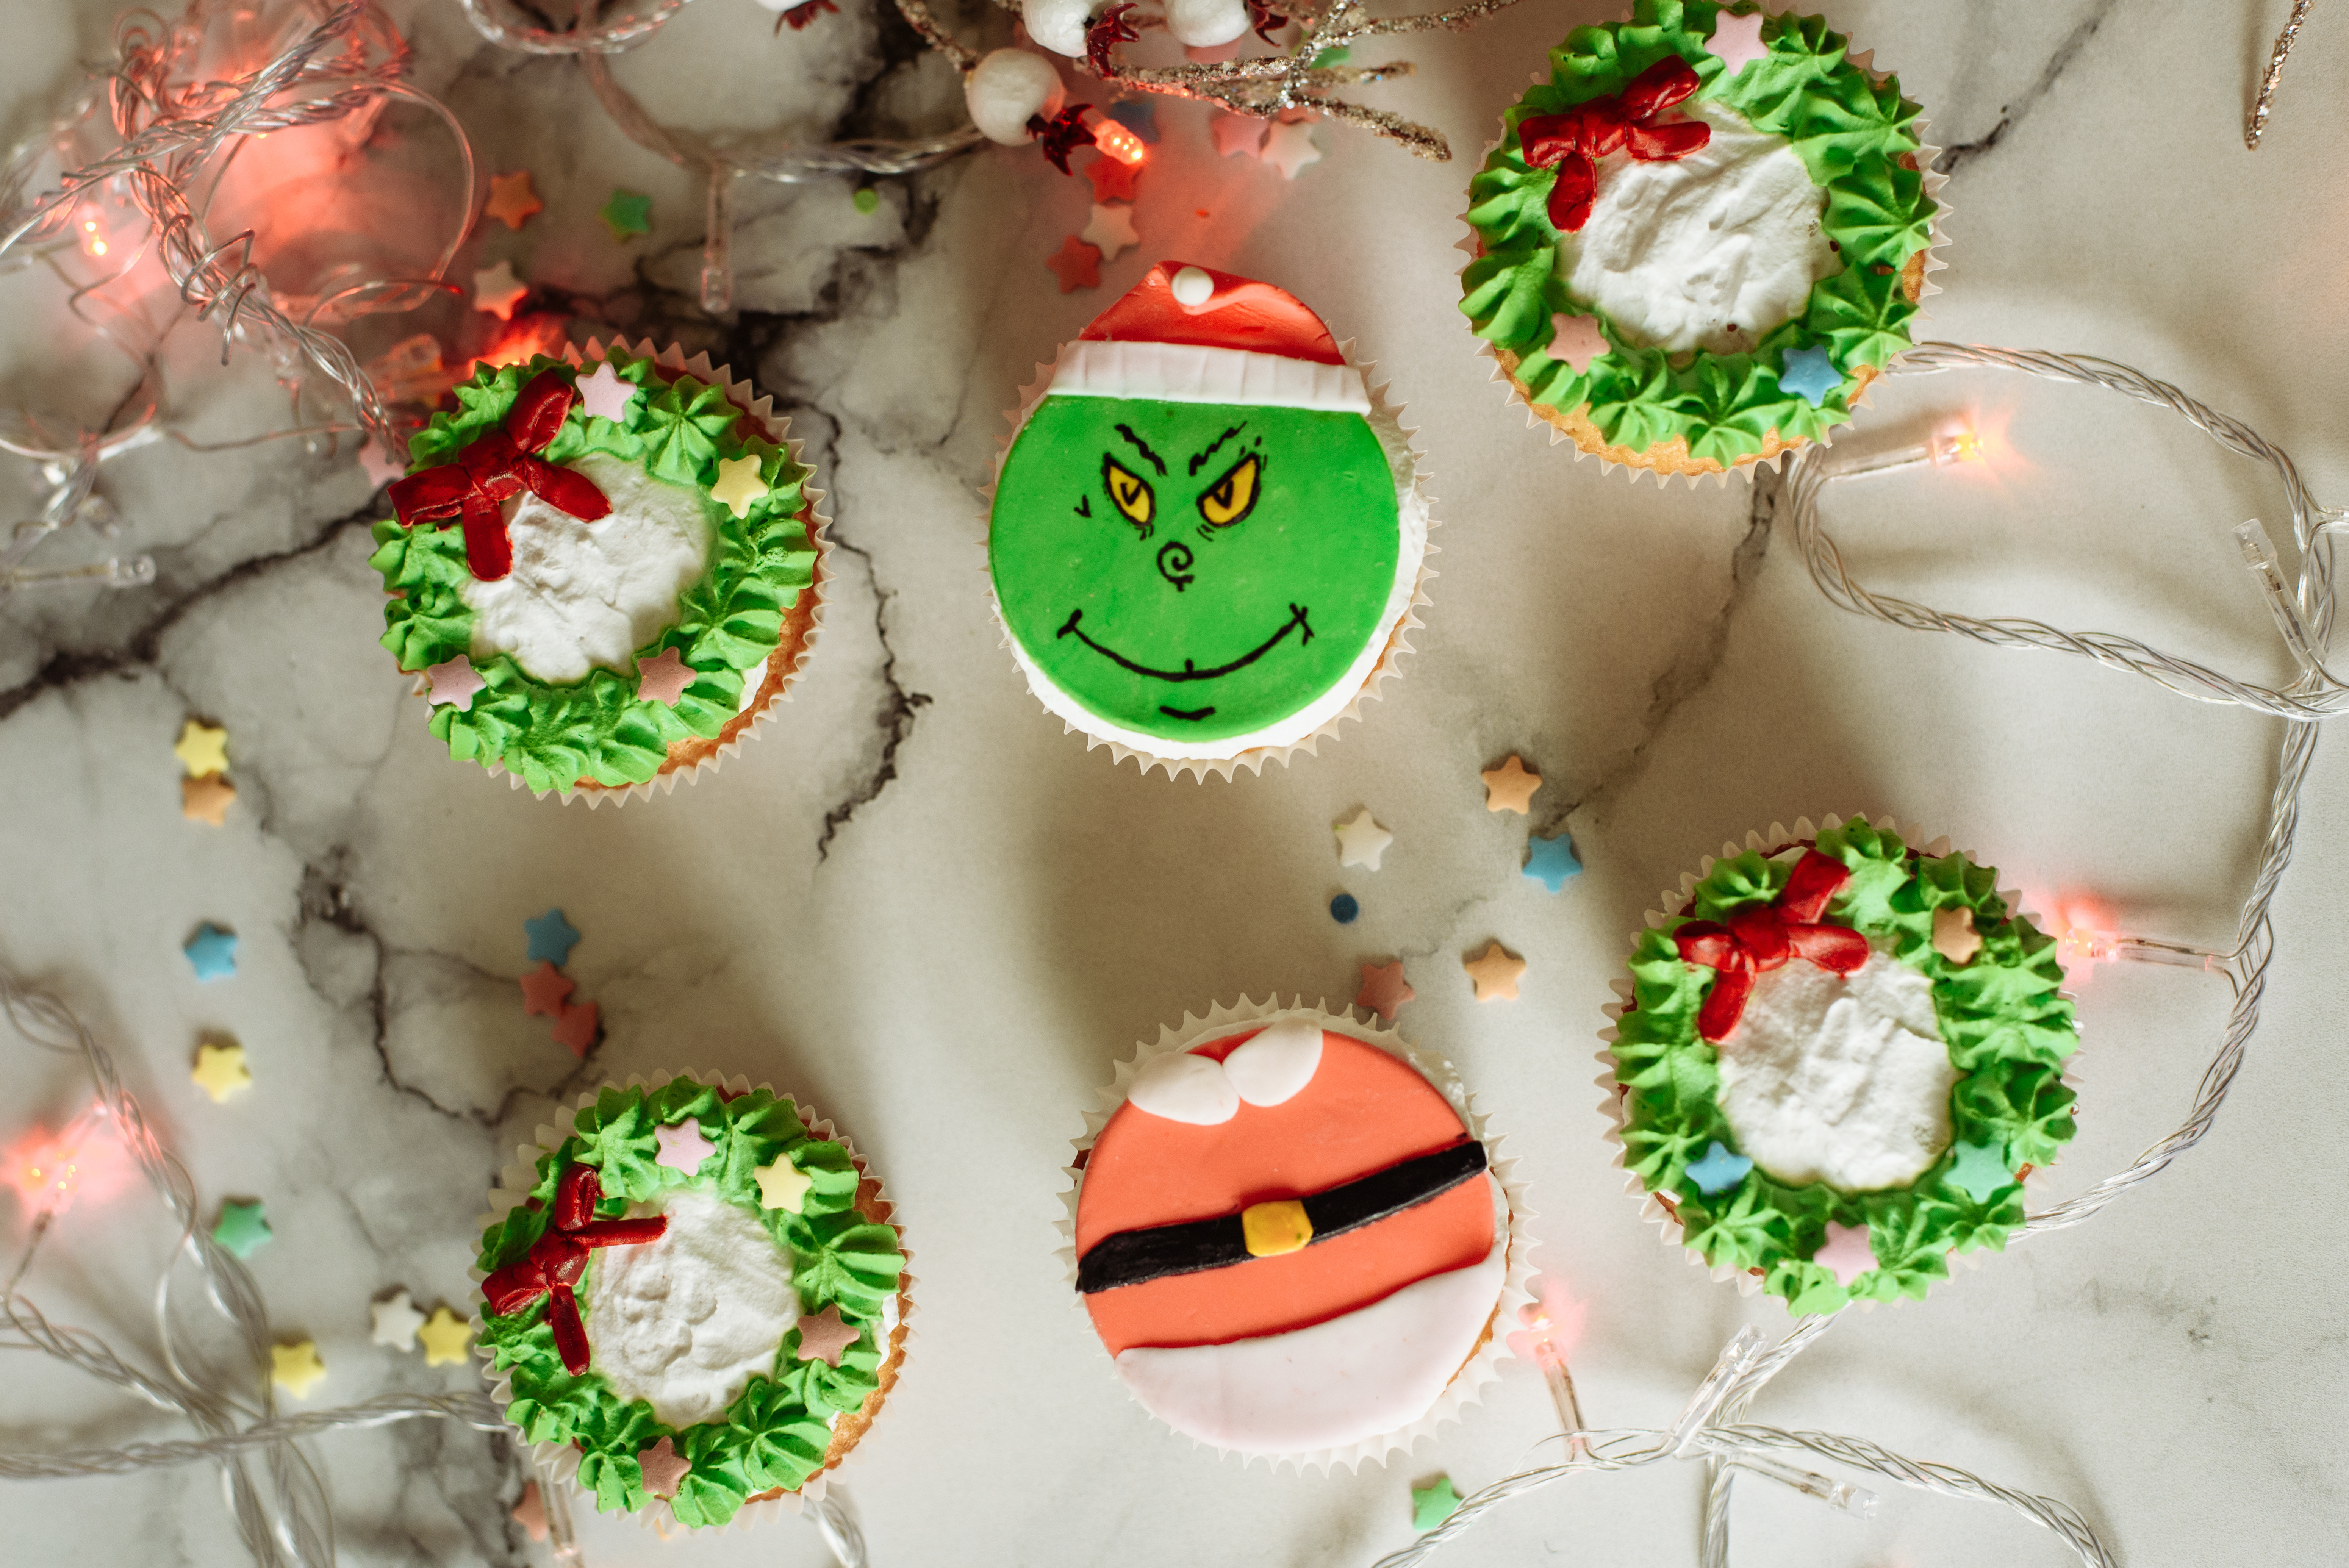 Samara Russia 7 10 2019 Christmas Cupcakes Decorated With Cream And Made In The Form Of A Grinch Who Stole Christmas Prsa Pittsburgh